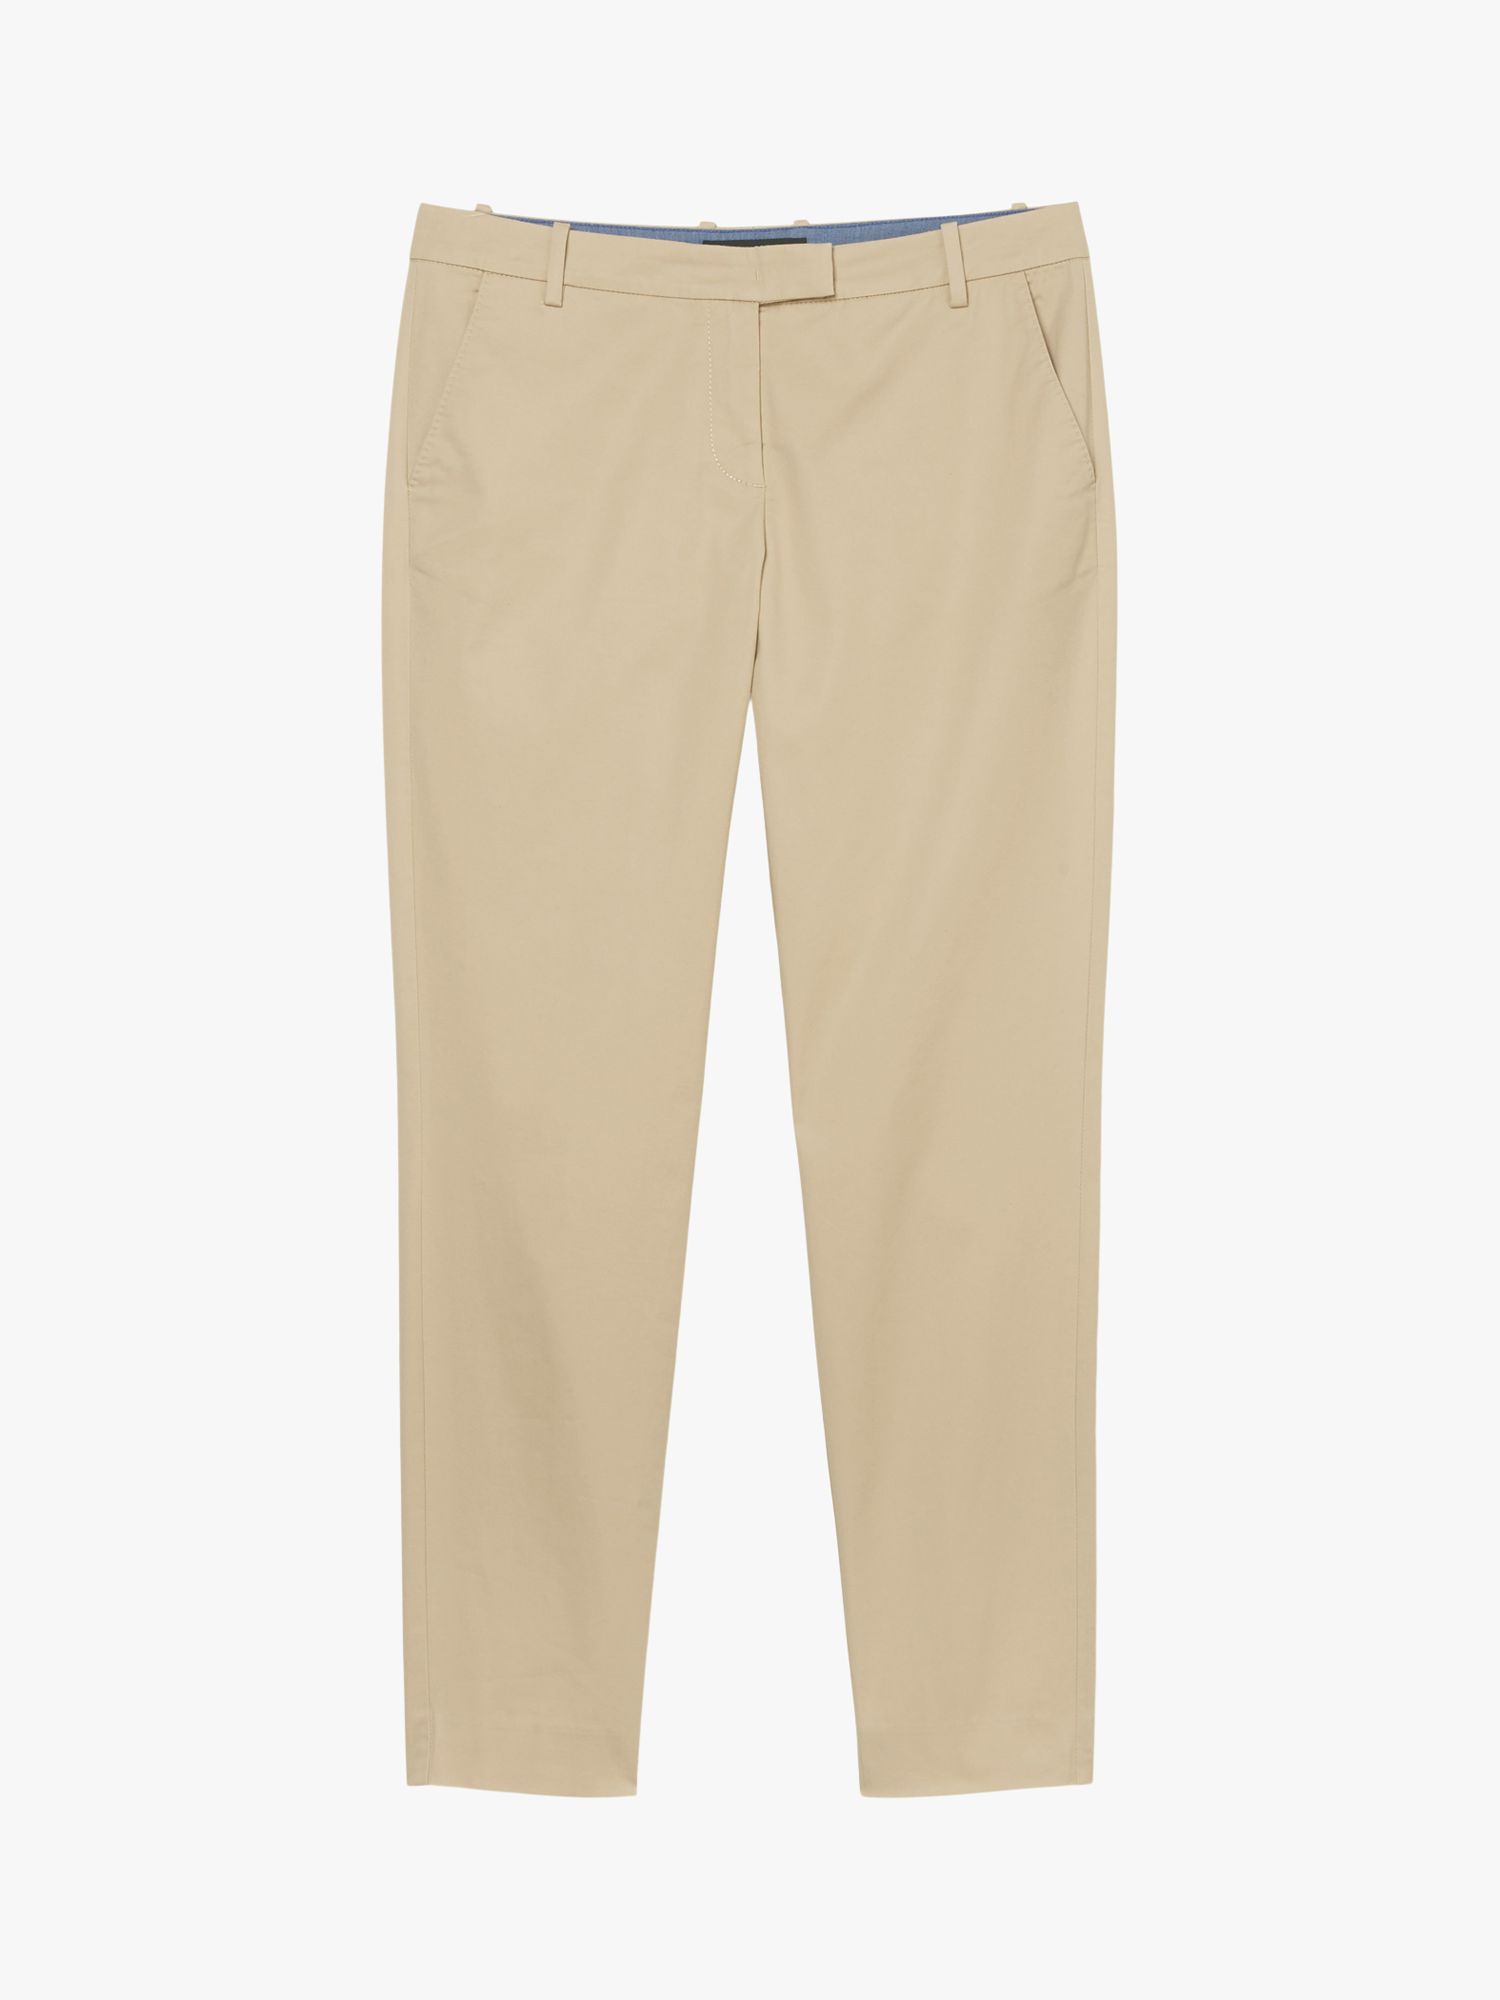 Marc O'Polo Comfy Slim Fit Trousers, Brown at John Lewis & Partners